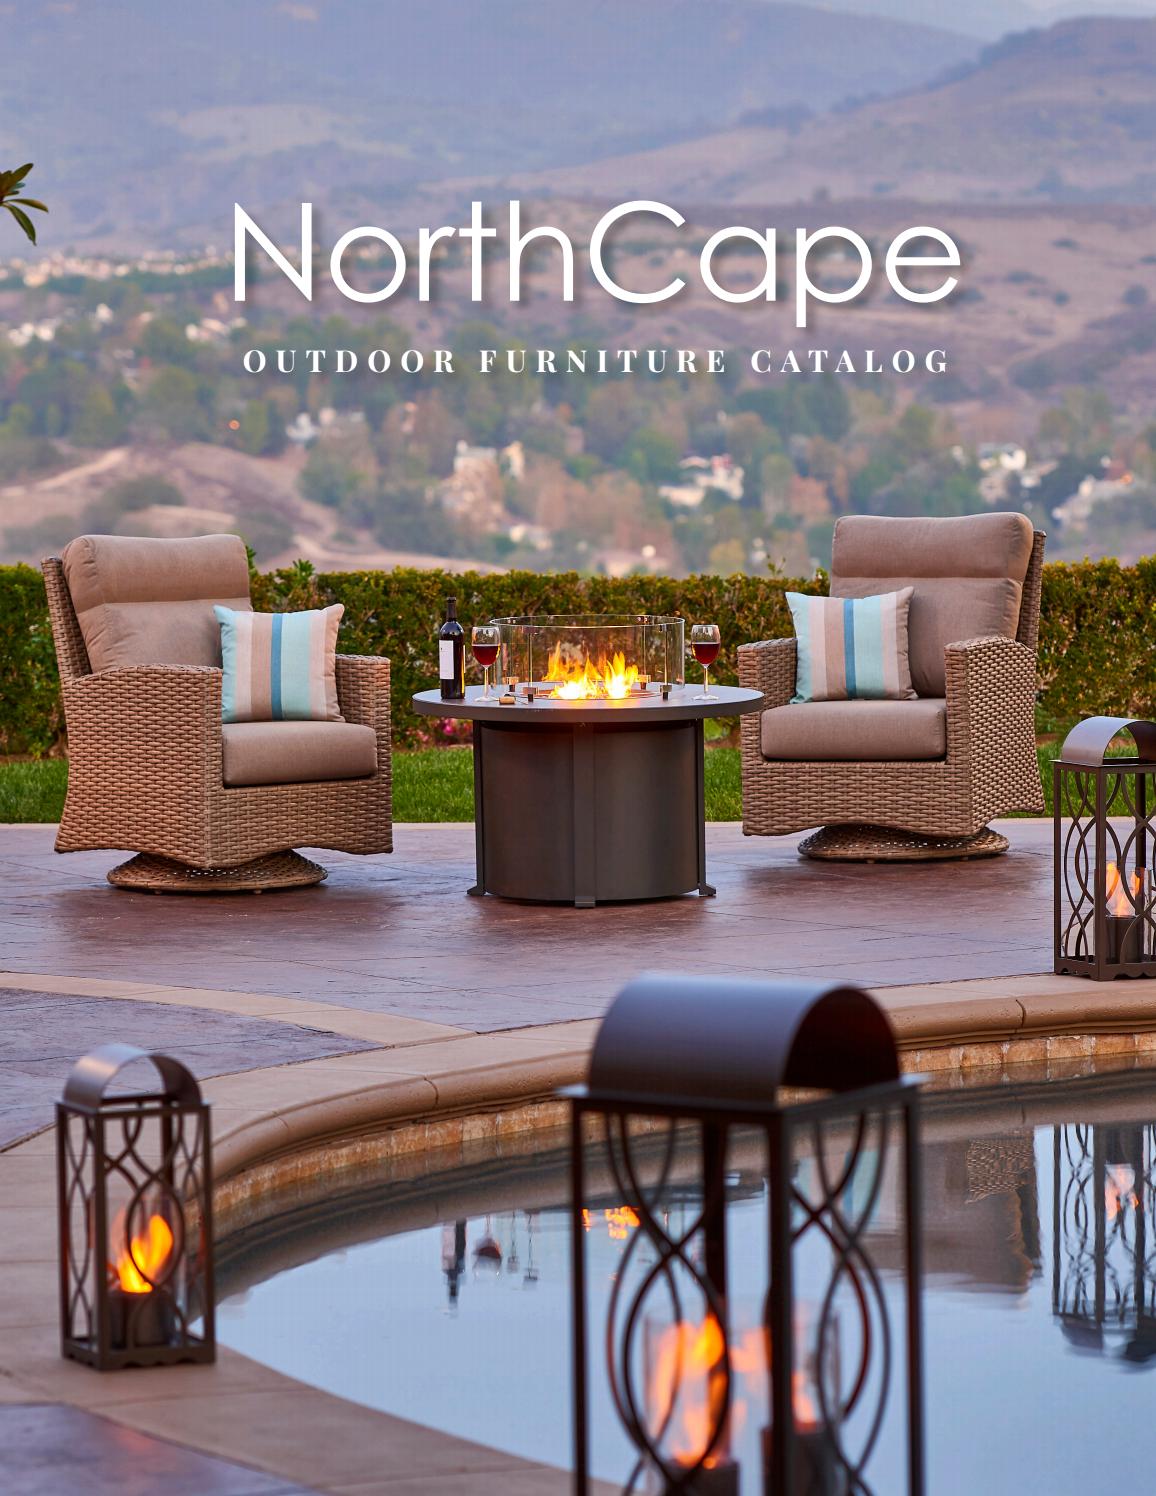 62 Grand Cherry Electric Fireplace Inspirational northcape Catalog by northcape issuu